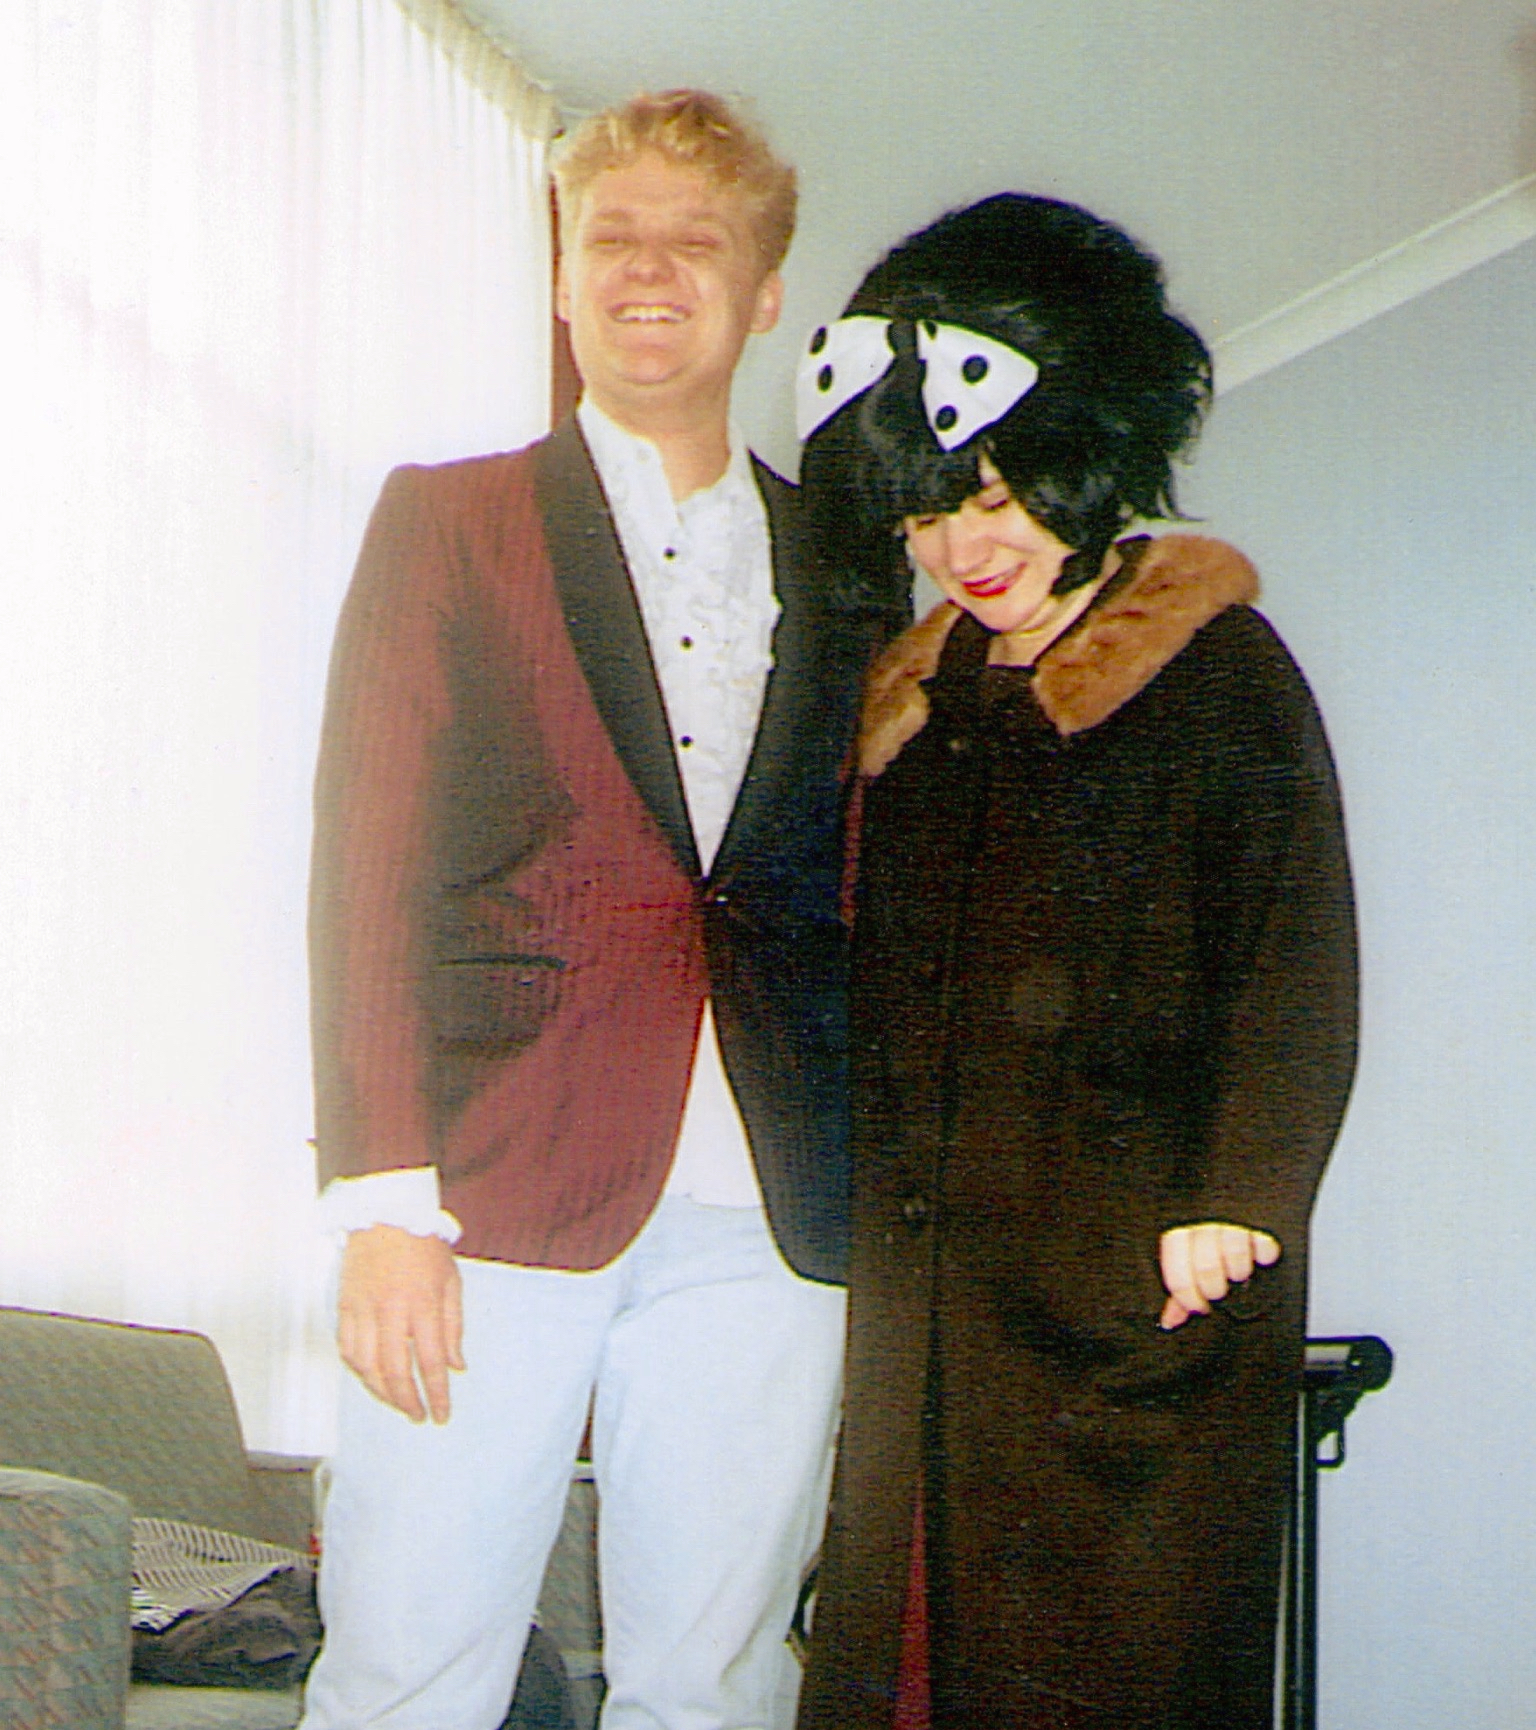 A smiling young Todd, cosplaying as Jon Pertwee, accompanied by a friend dressed as Barbara